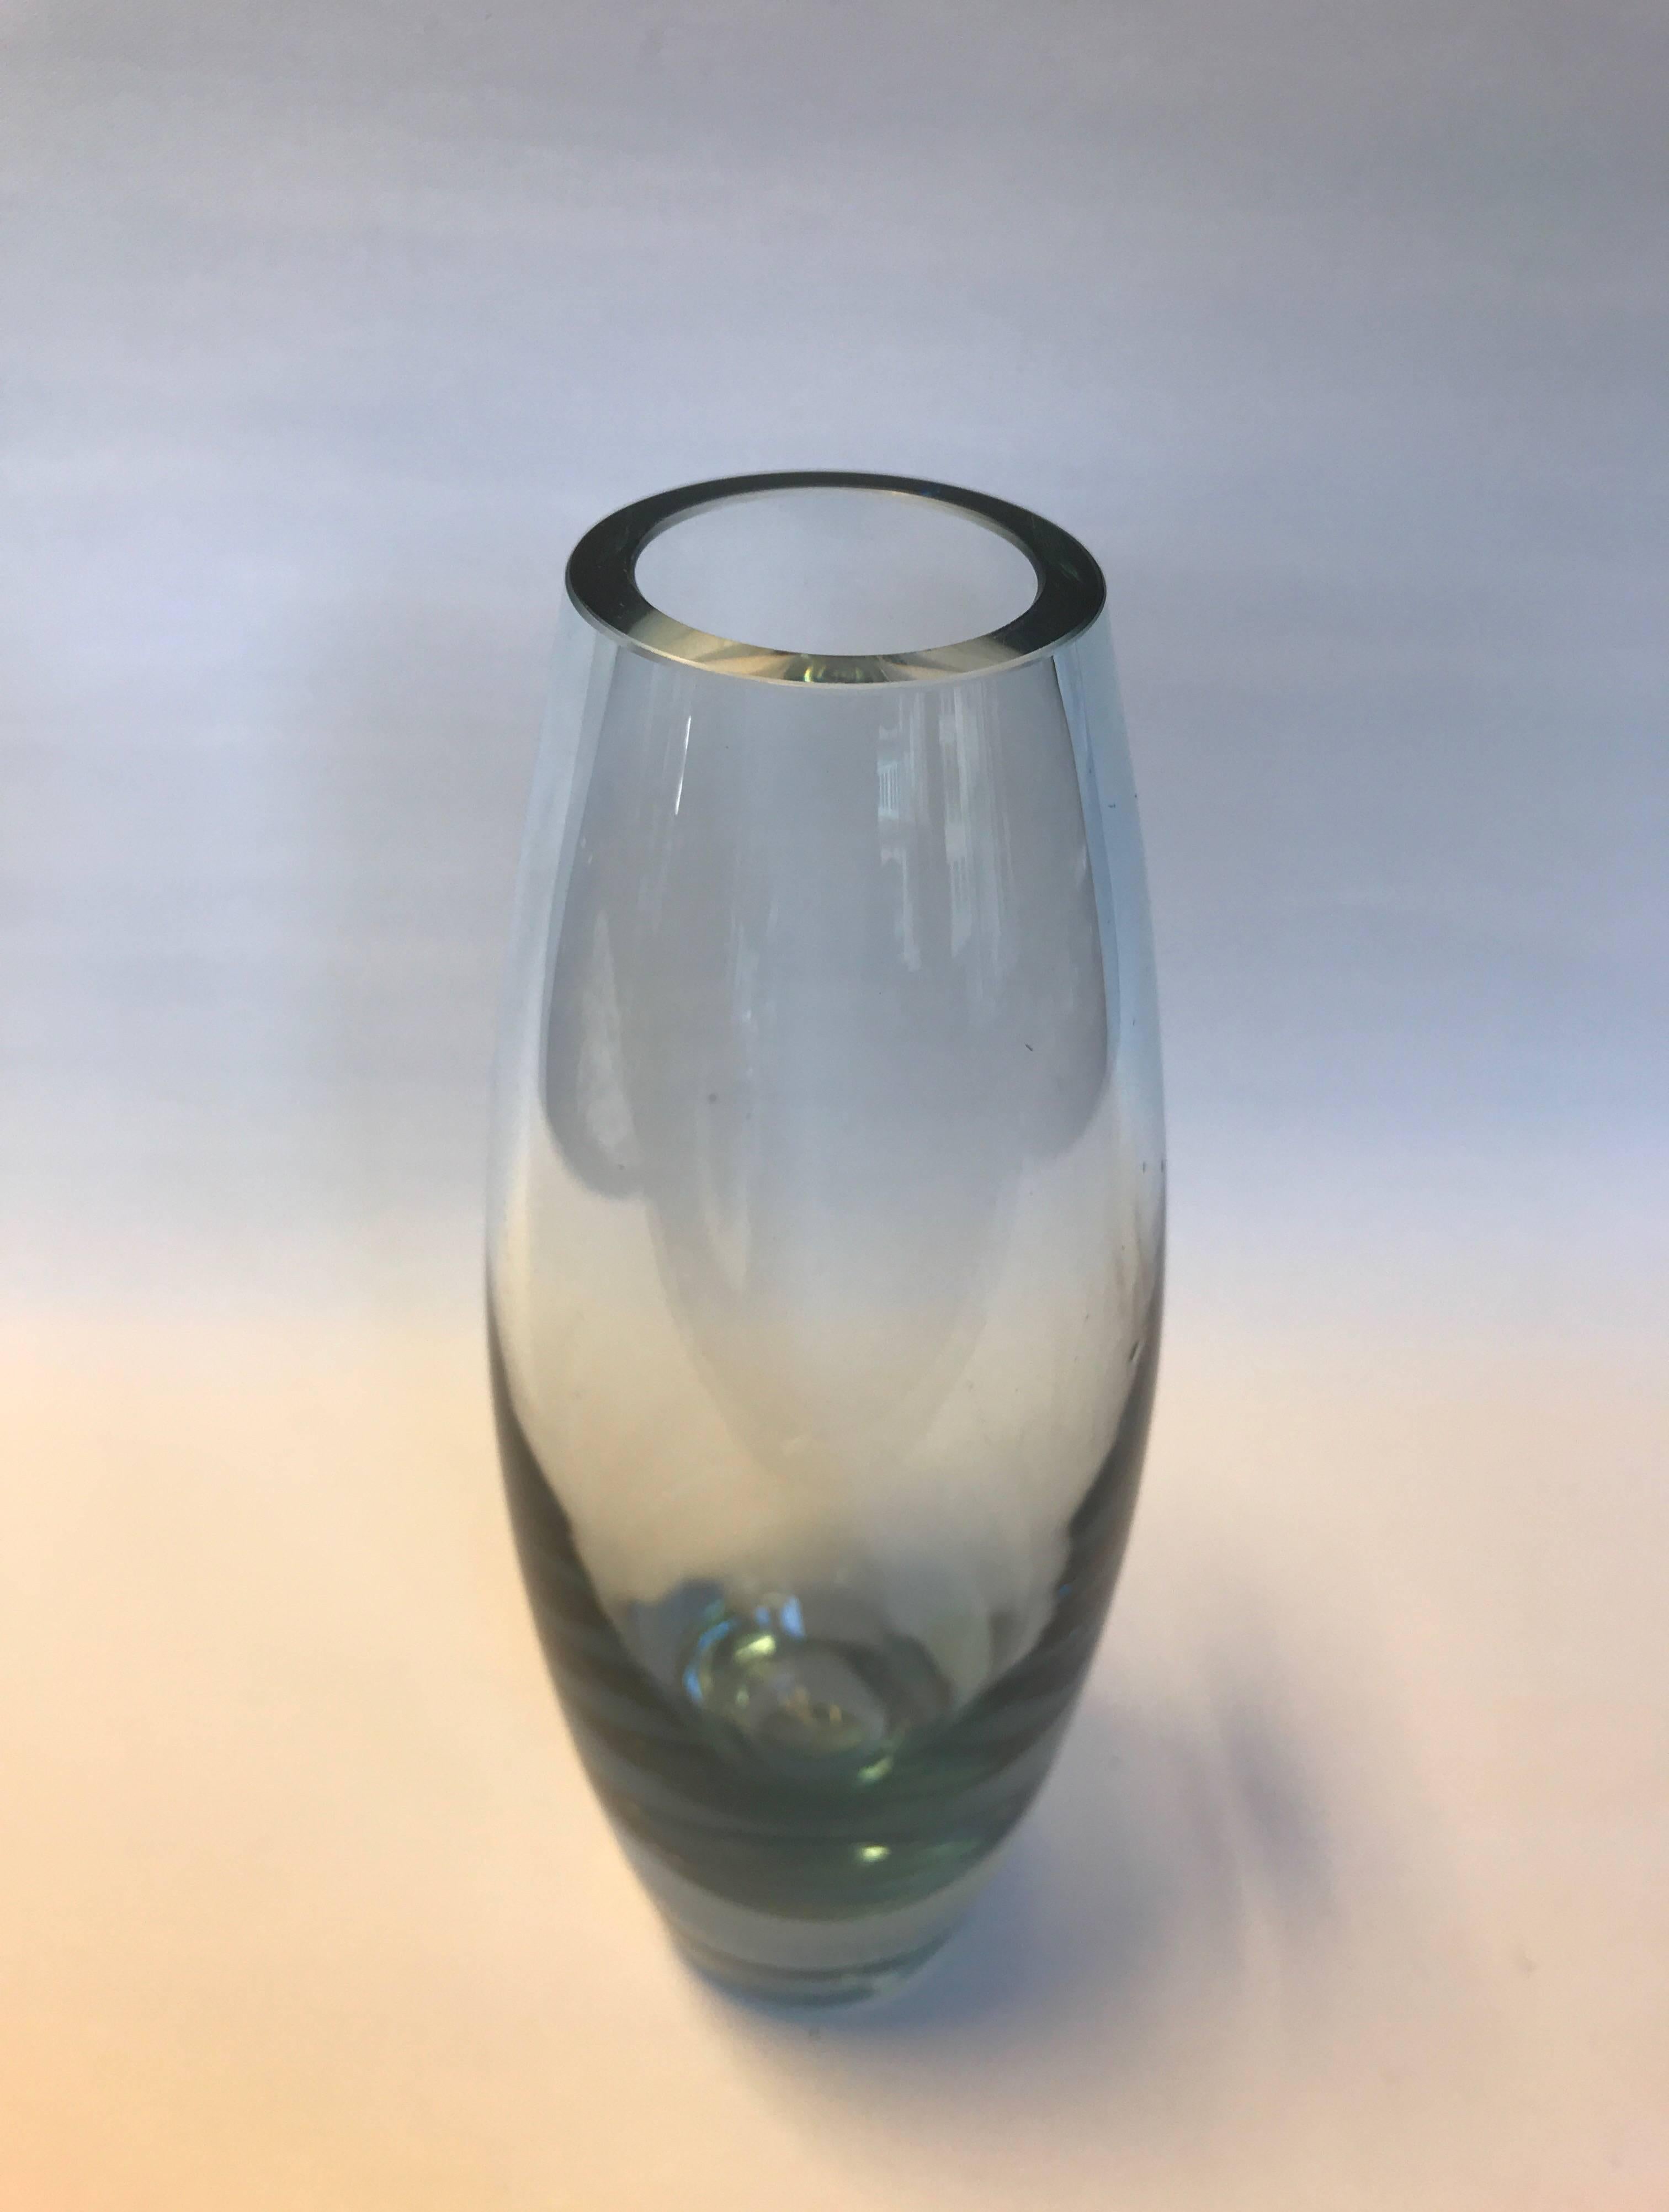 Holmegaard vase by Per Lütken, Denmark, 1950s. Measures: Diameter mid body 9 cm., height 22 cm. All in good condition and total 5 pcs. Price listed per item, but if all five vases, please request price.